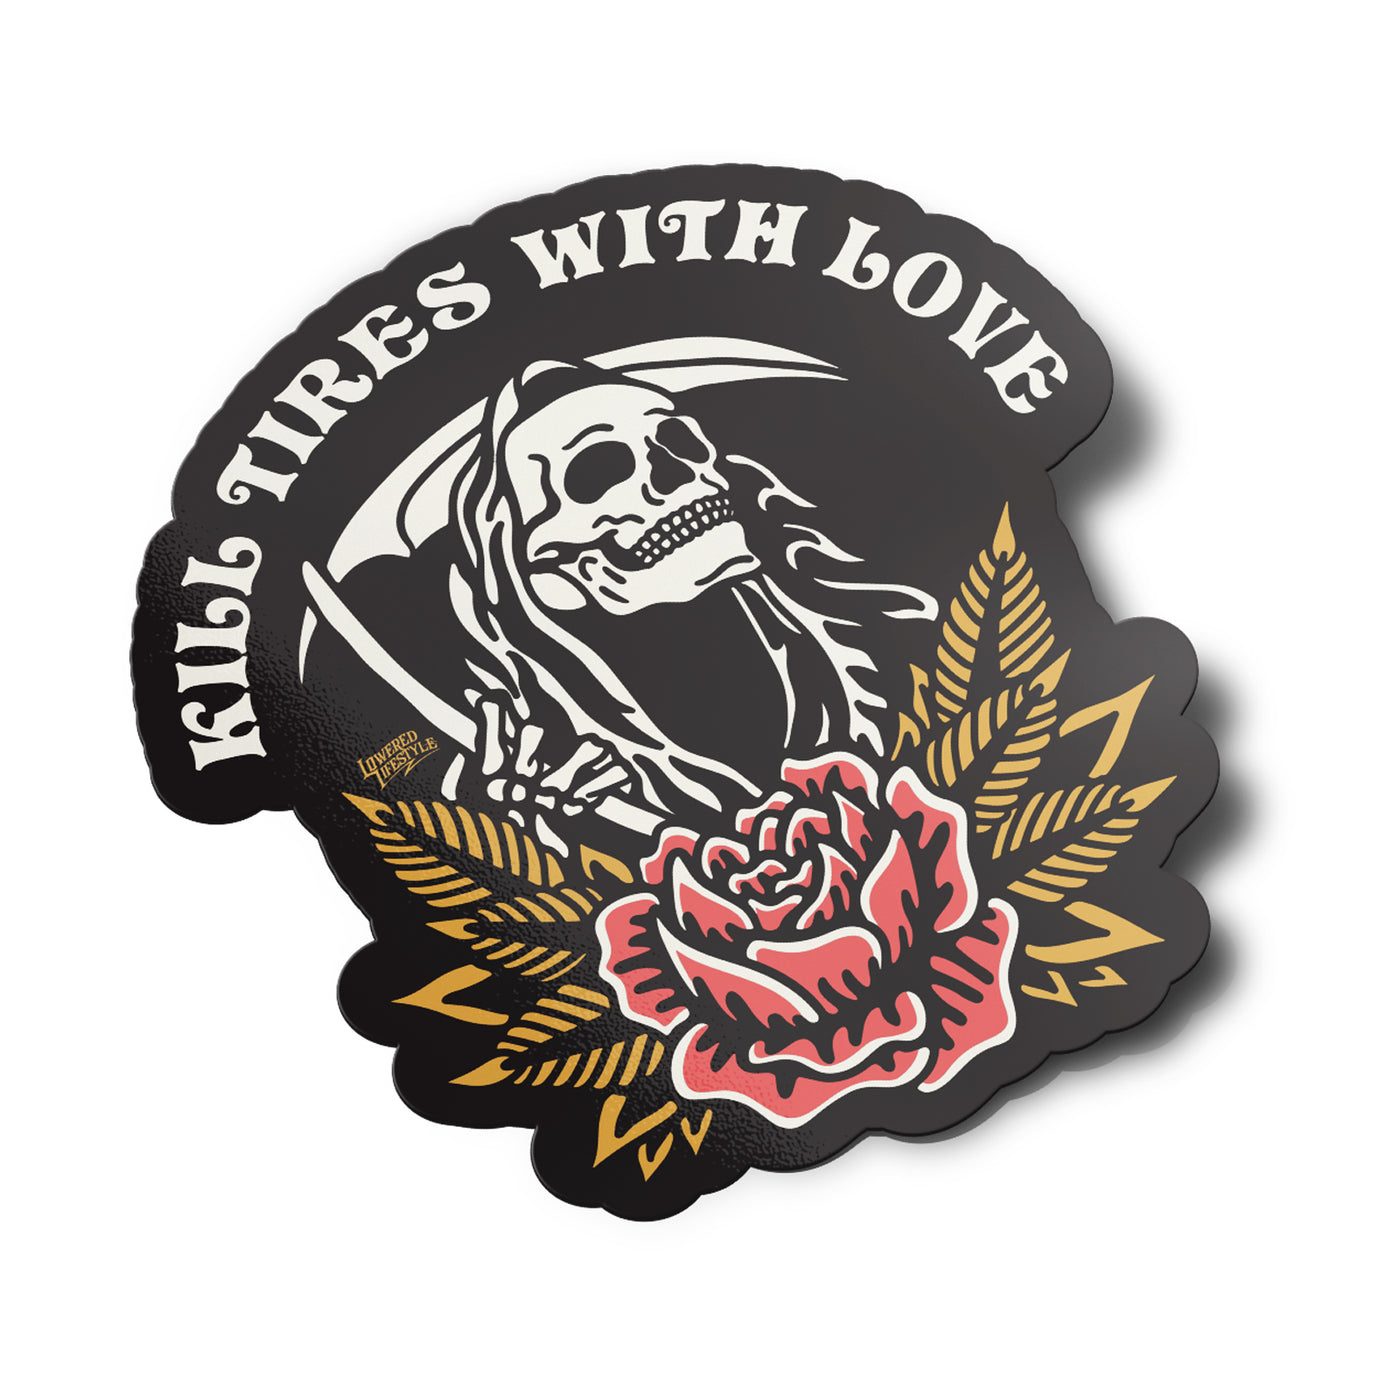 Sticker – Kill Tires With Love